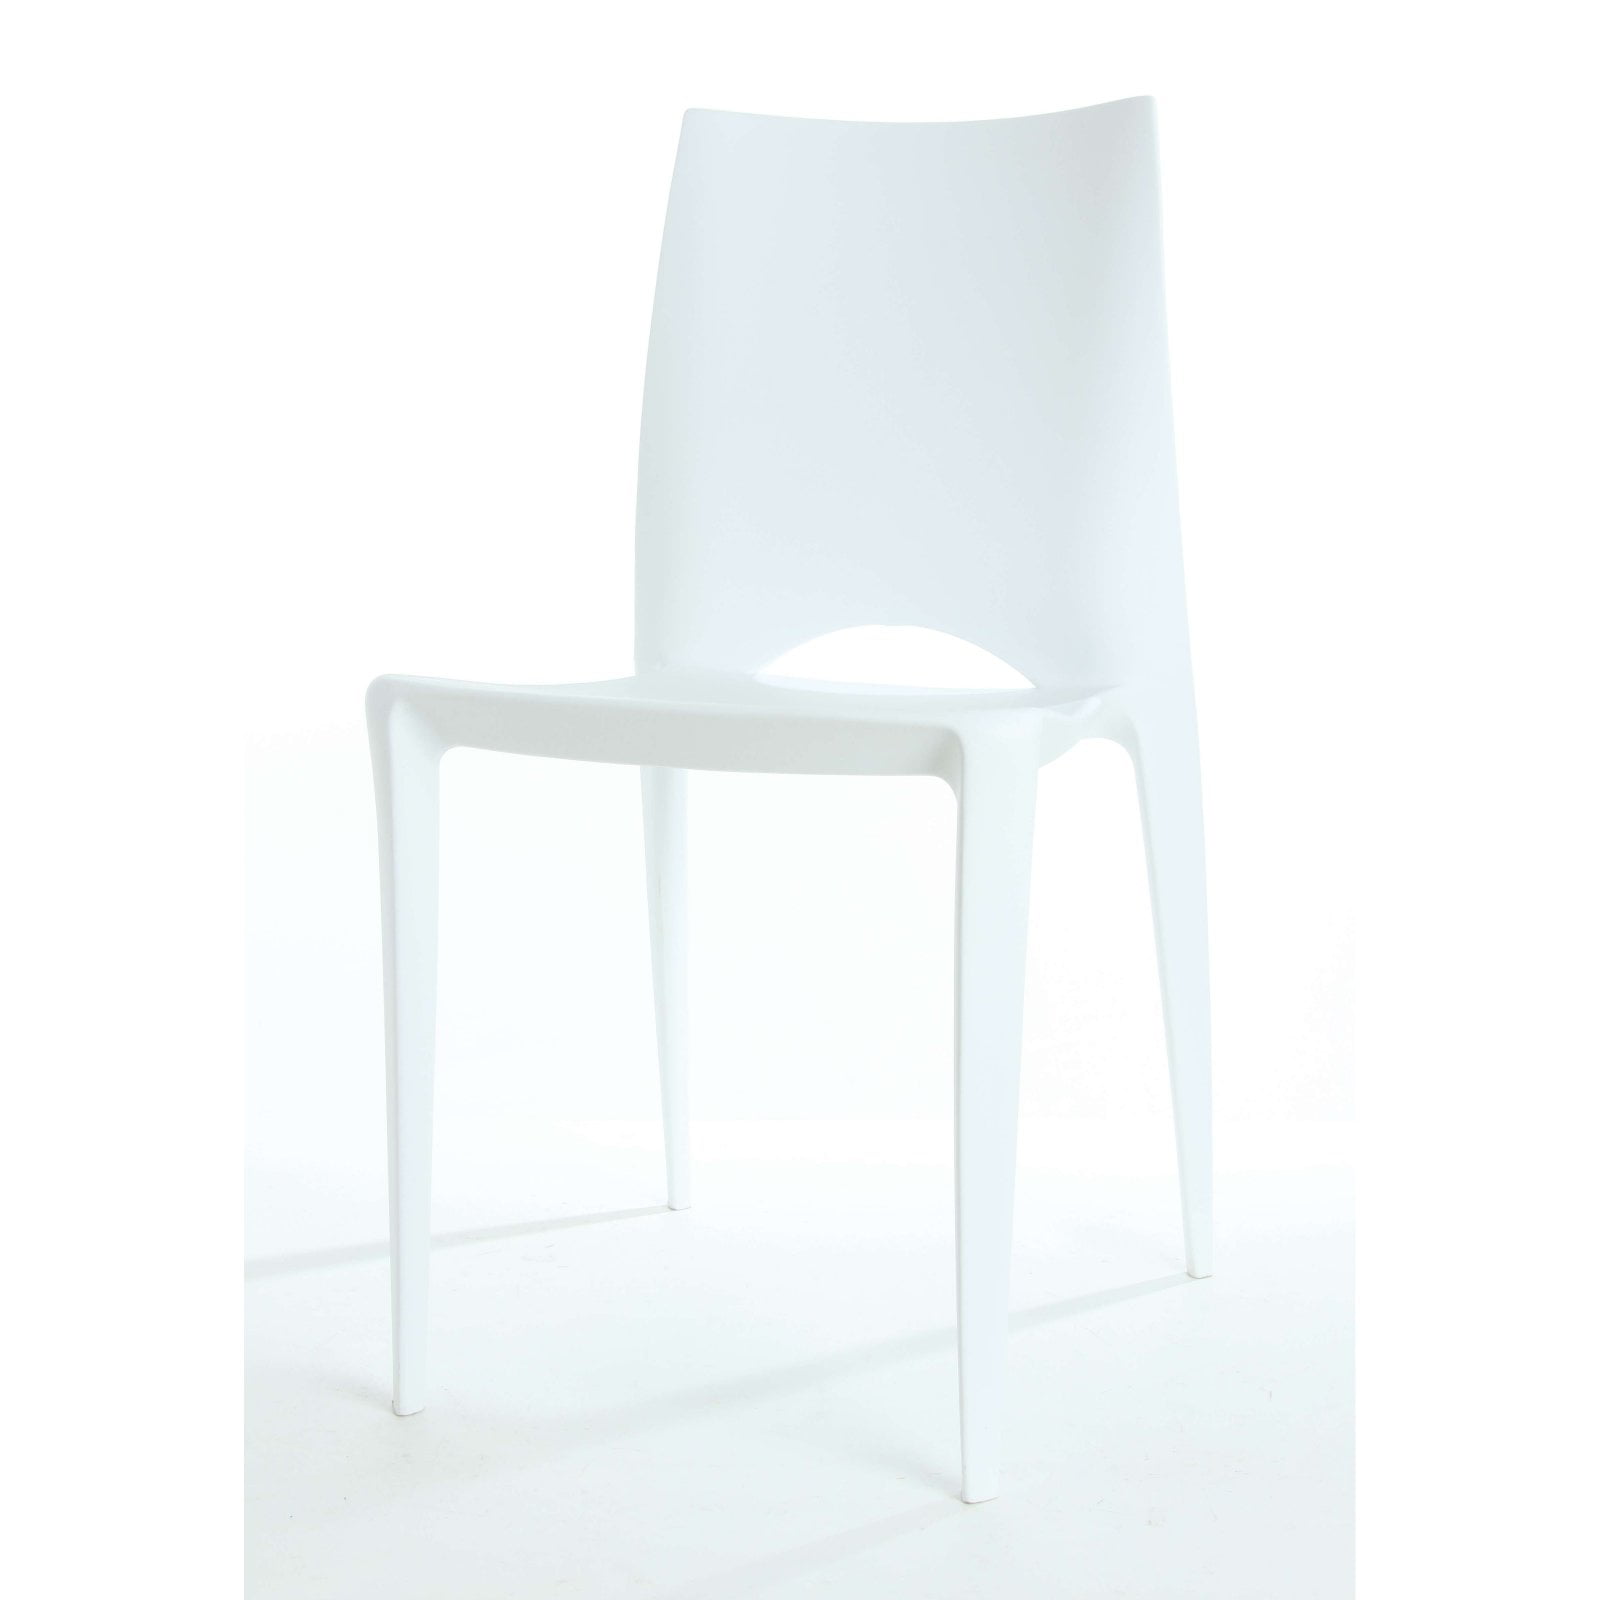 Rpc-kage-bl-web4 Black Armless Kage Stackable Polycarbonate Side Chair, Set Of 4 - 34.5 X 14.5 X 15.5 In.